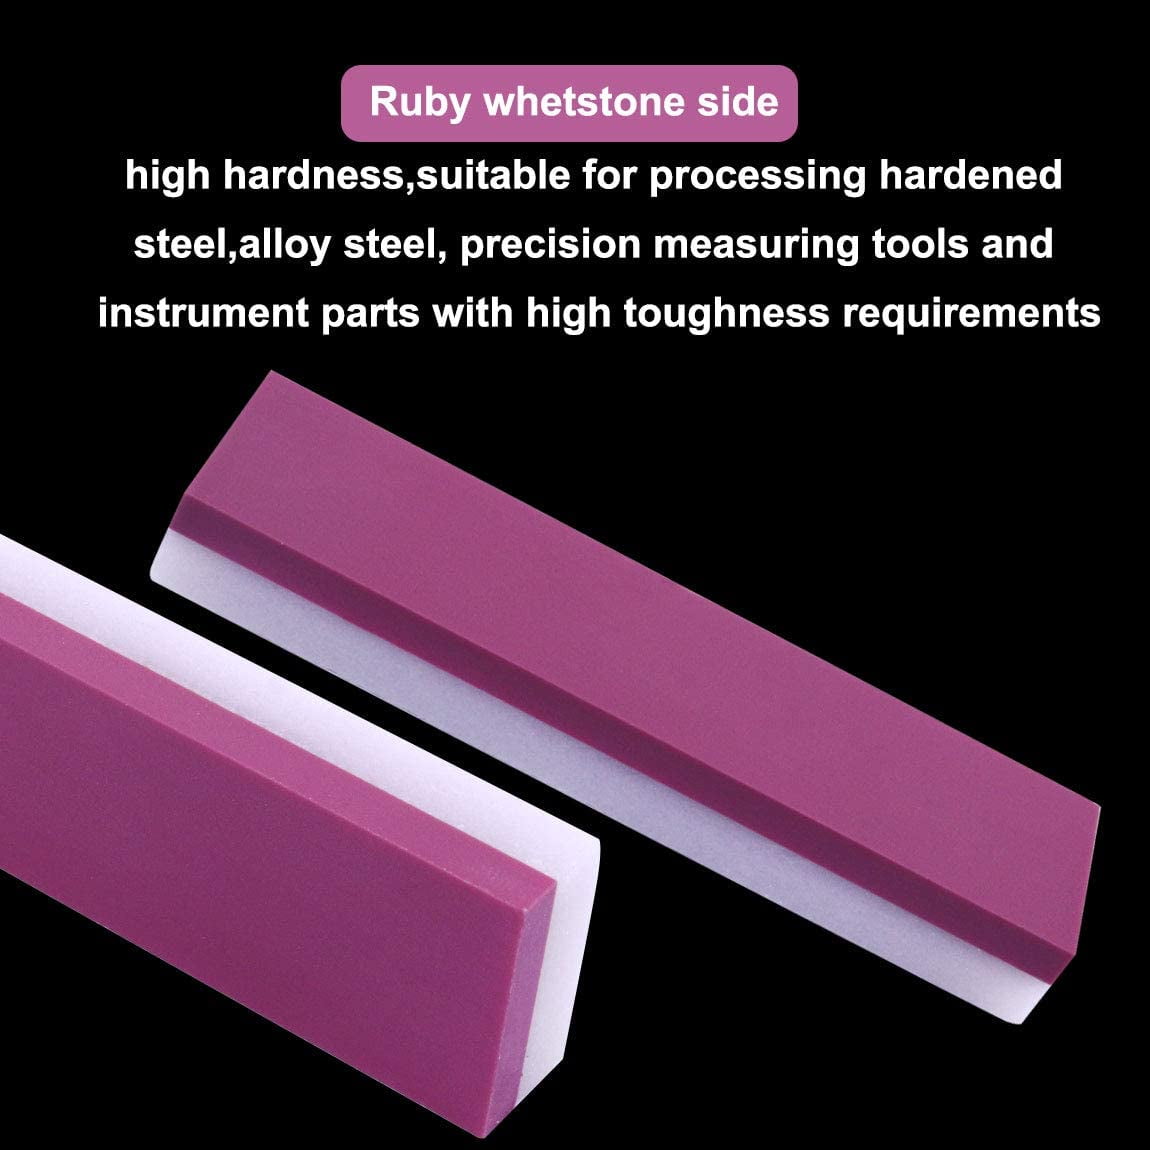 Details about   Double Sided Sharpener Stone Grit Whetstone Oilstone Ruby 3000# and Agate10000# 